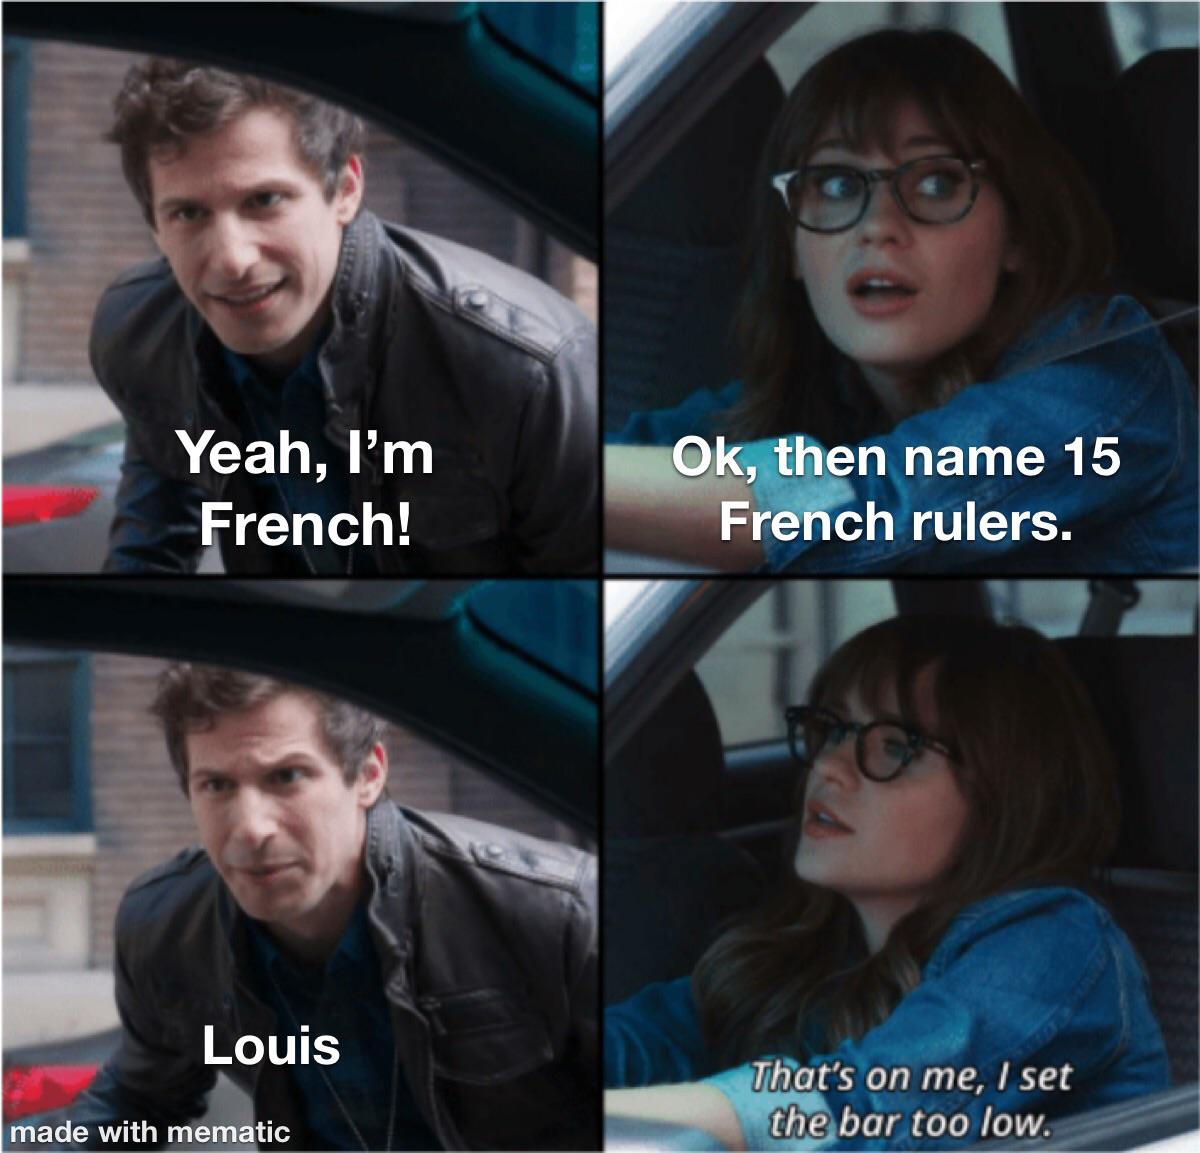 dank memes - metallica fan meme - Yeah, I'm French! Louis made with mematic Ok, then name 15 French rulers. That's on me, I set the bar too low.